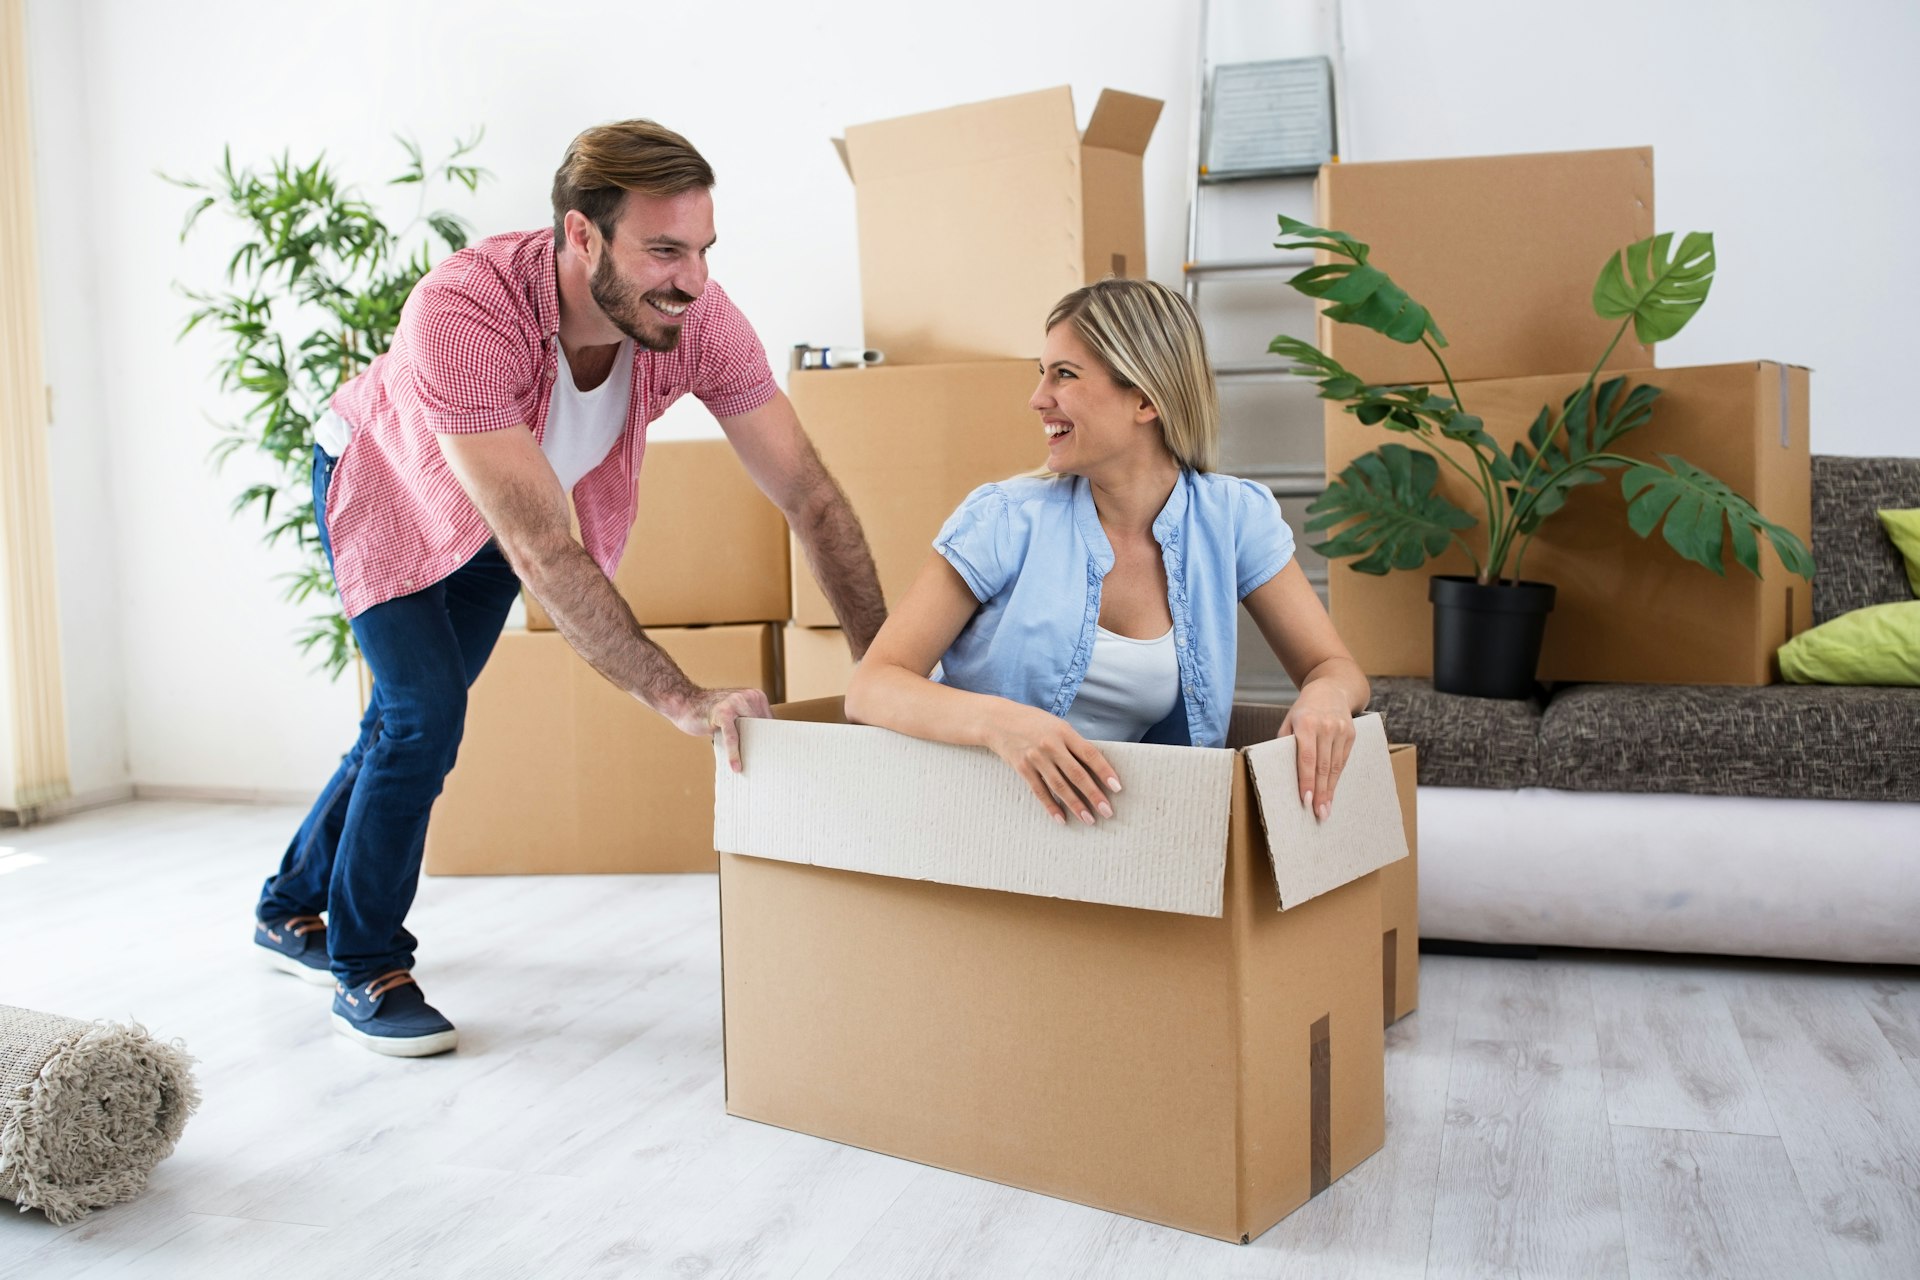 A couple having fun messing around with house moving boxes after renting a property